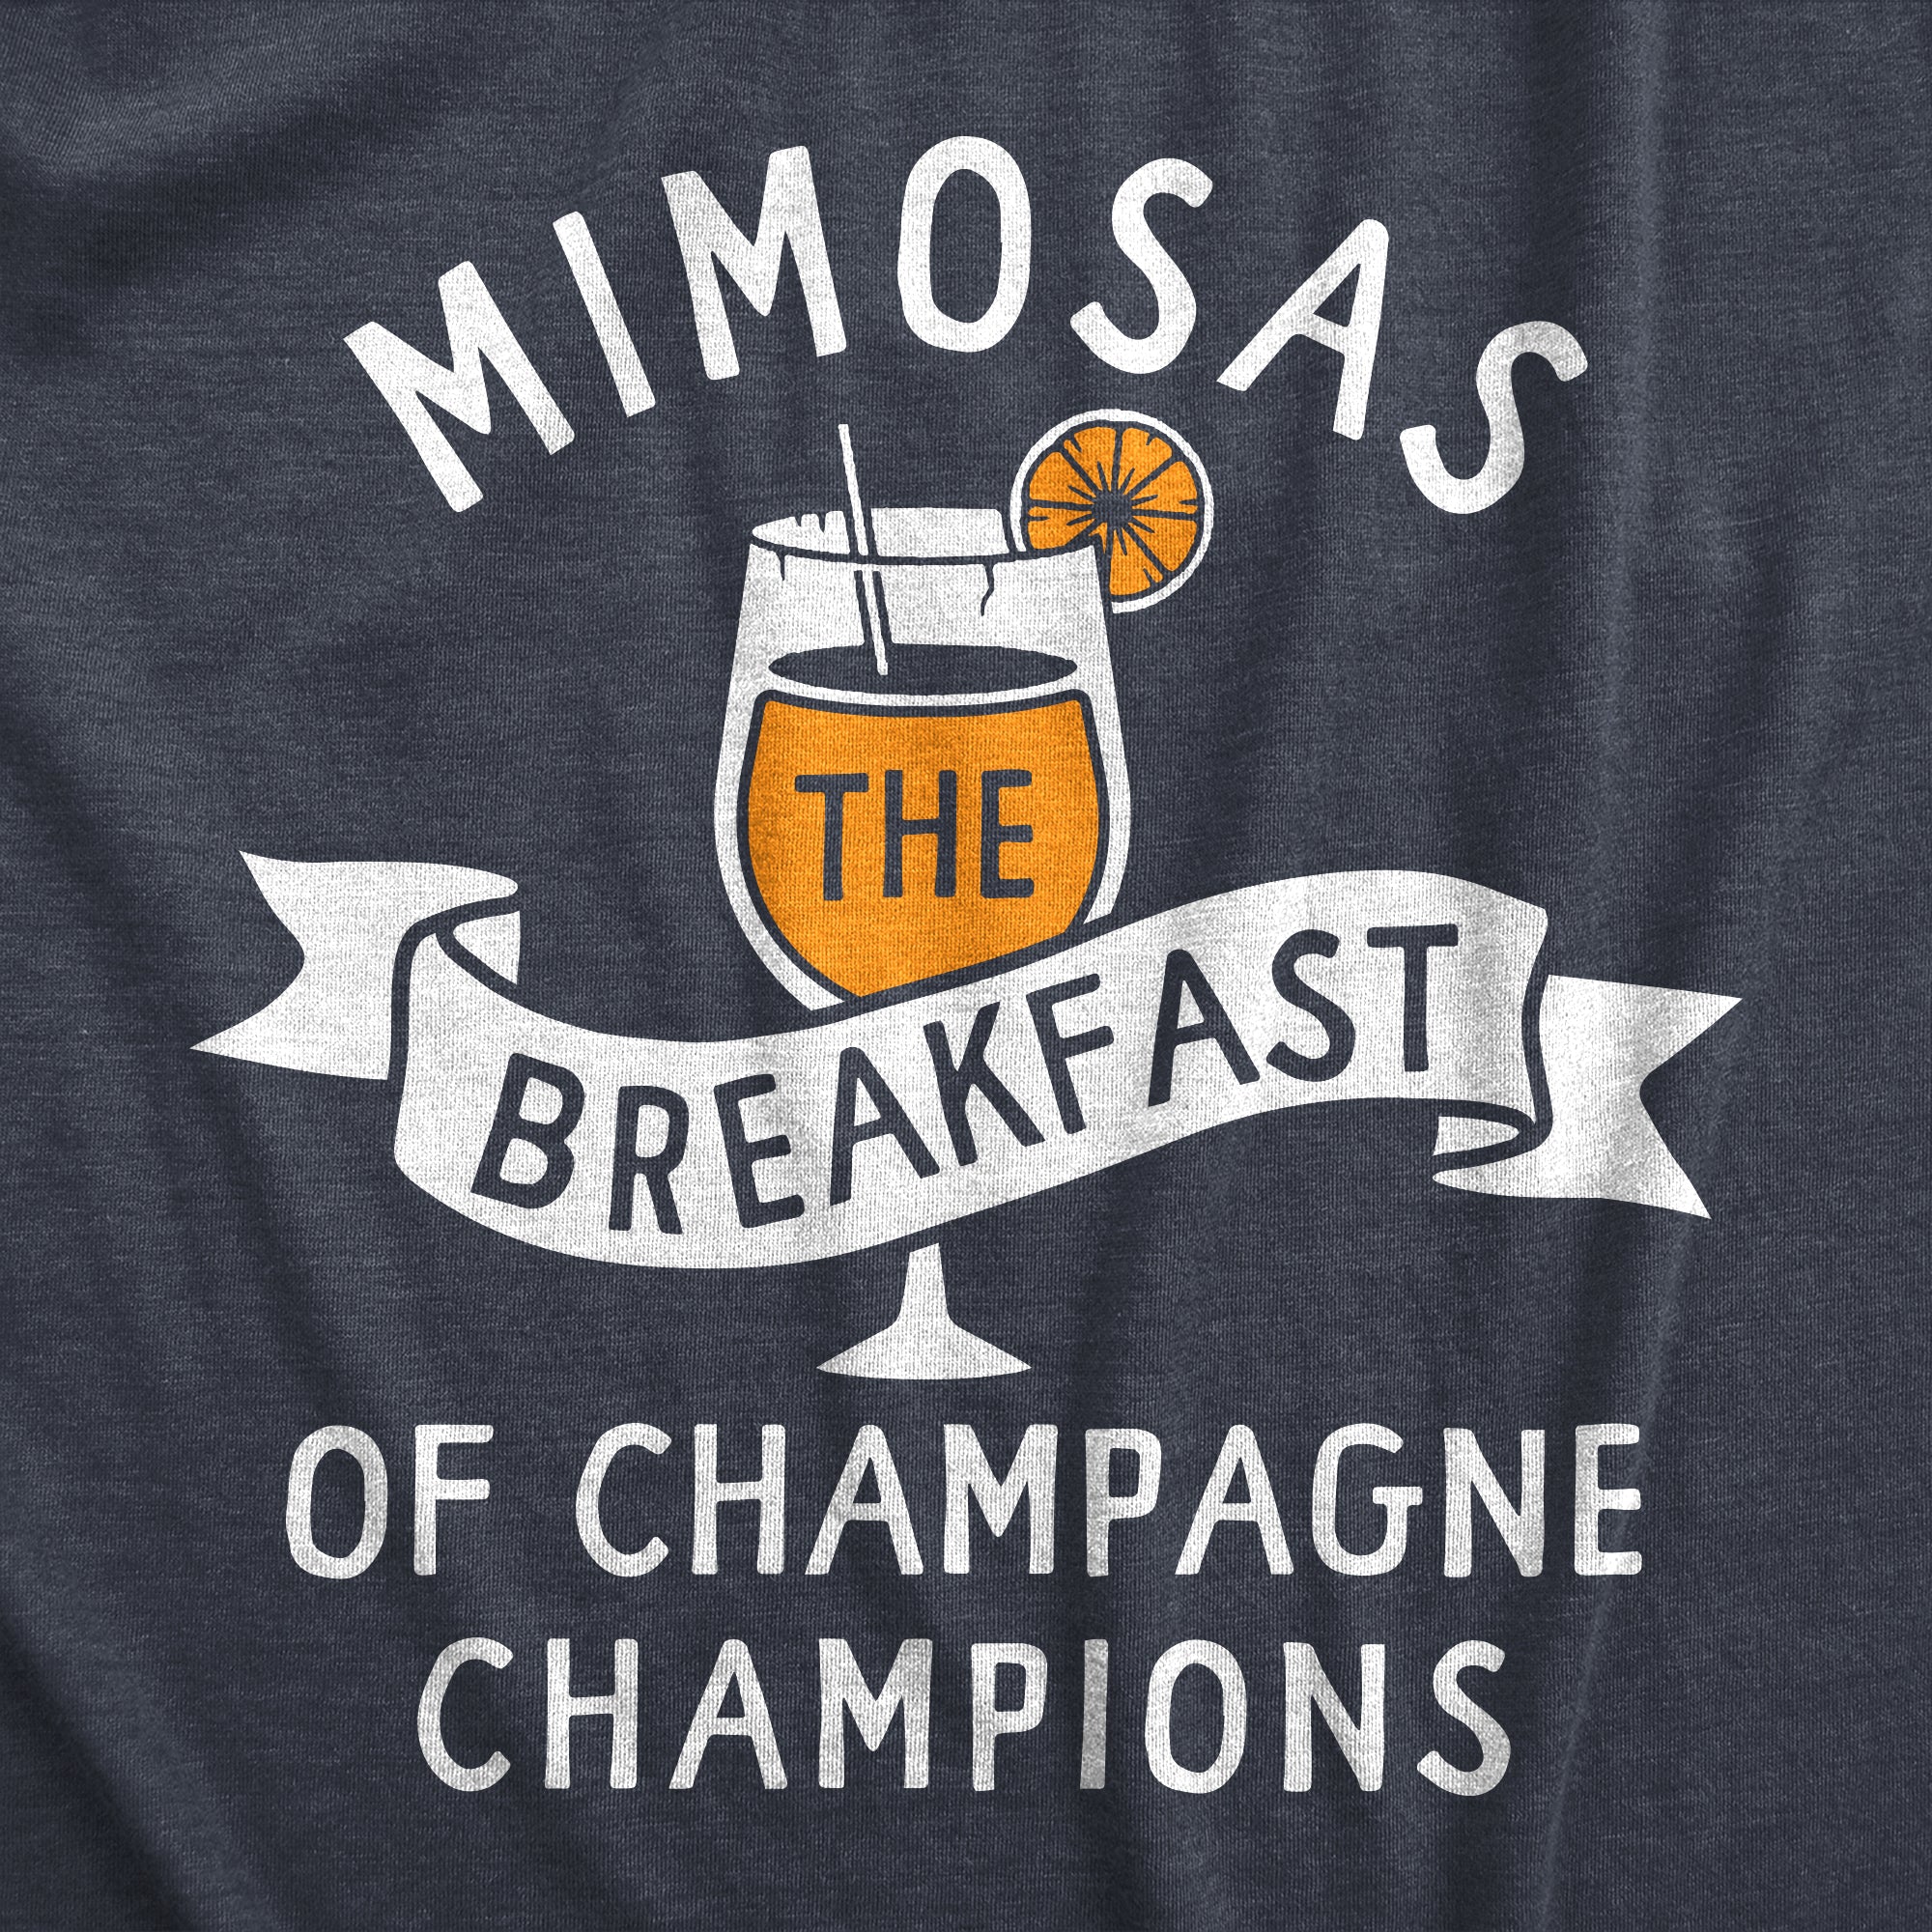 Funny Heather Navy - MIMOSAS Mimosas The Breakfast Of Champagne Champions Womens T Shirt Nerdy Drinking Tee